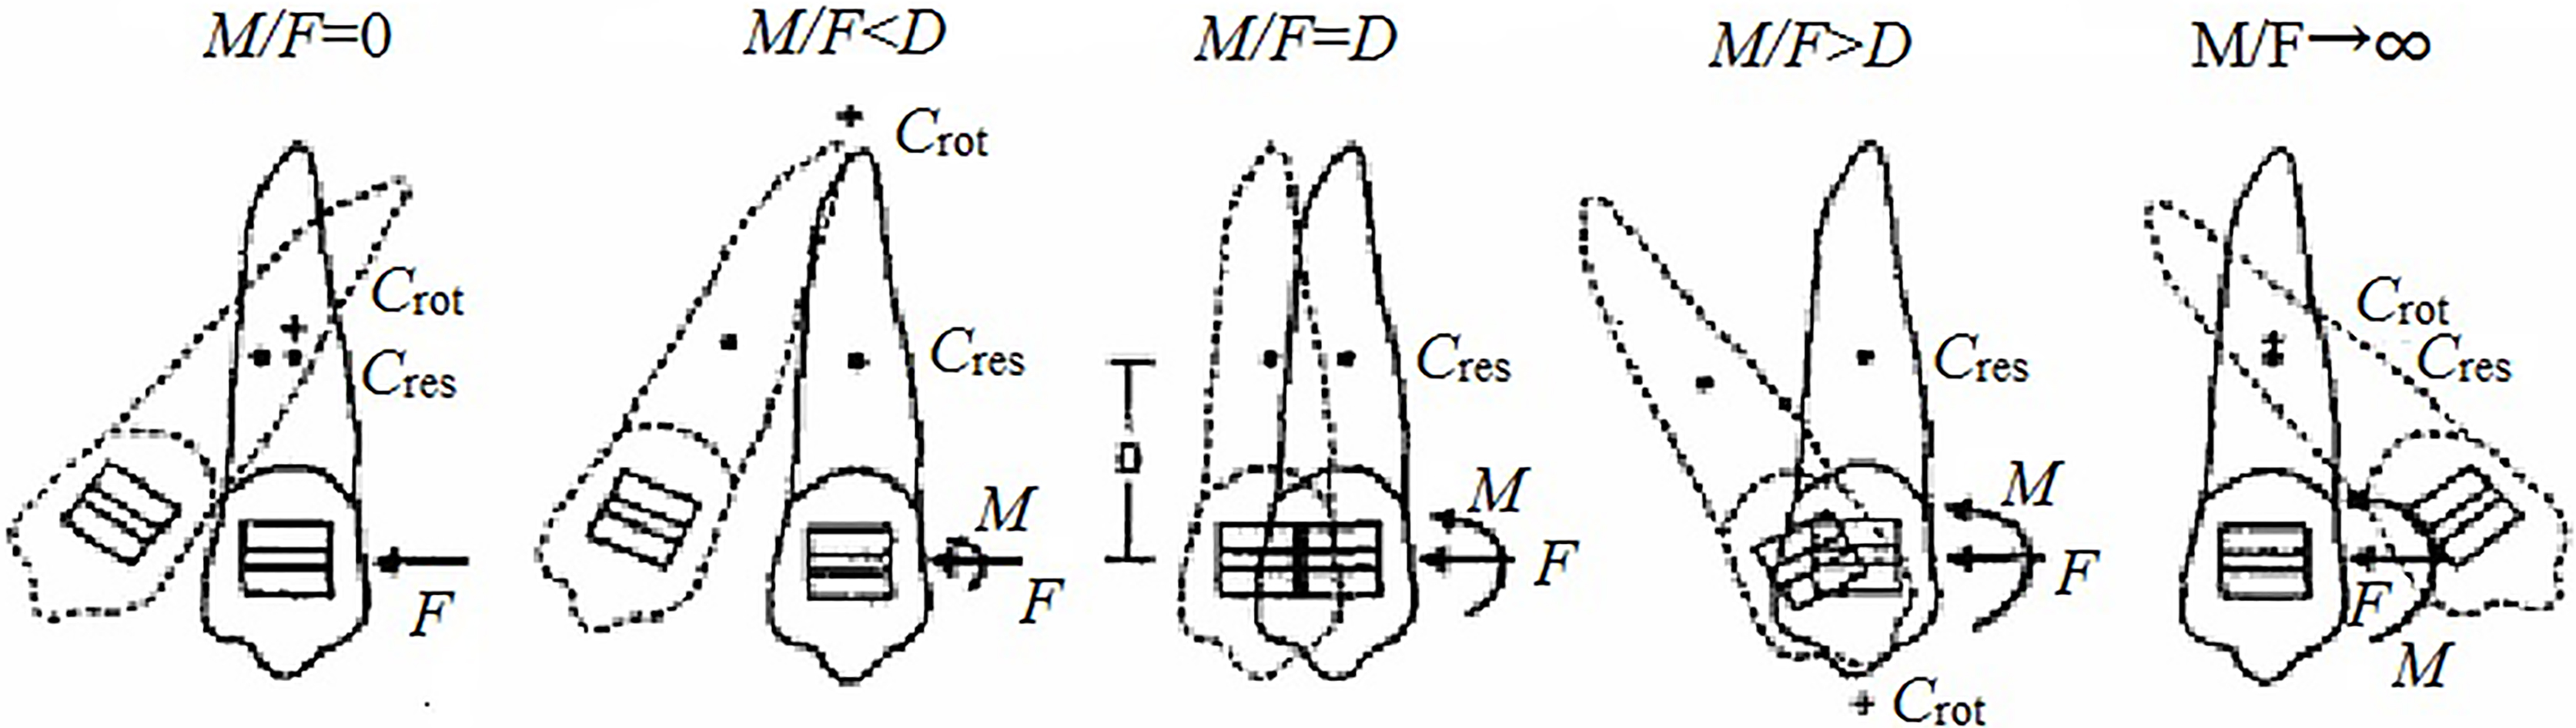 Relationships between tooth movements and orthodontic force systems.